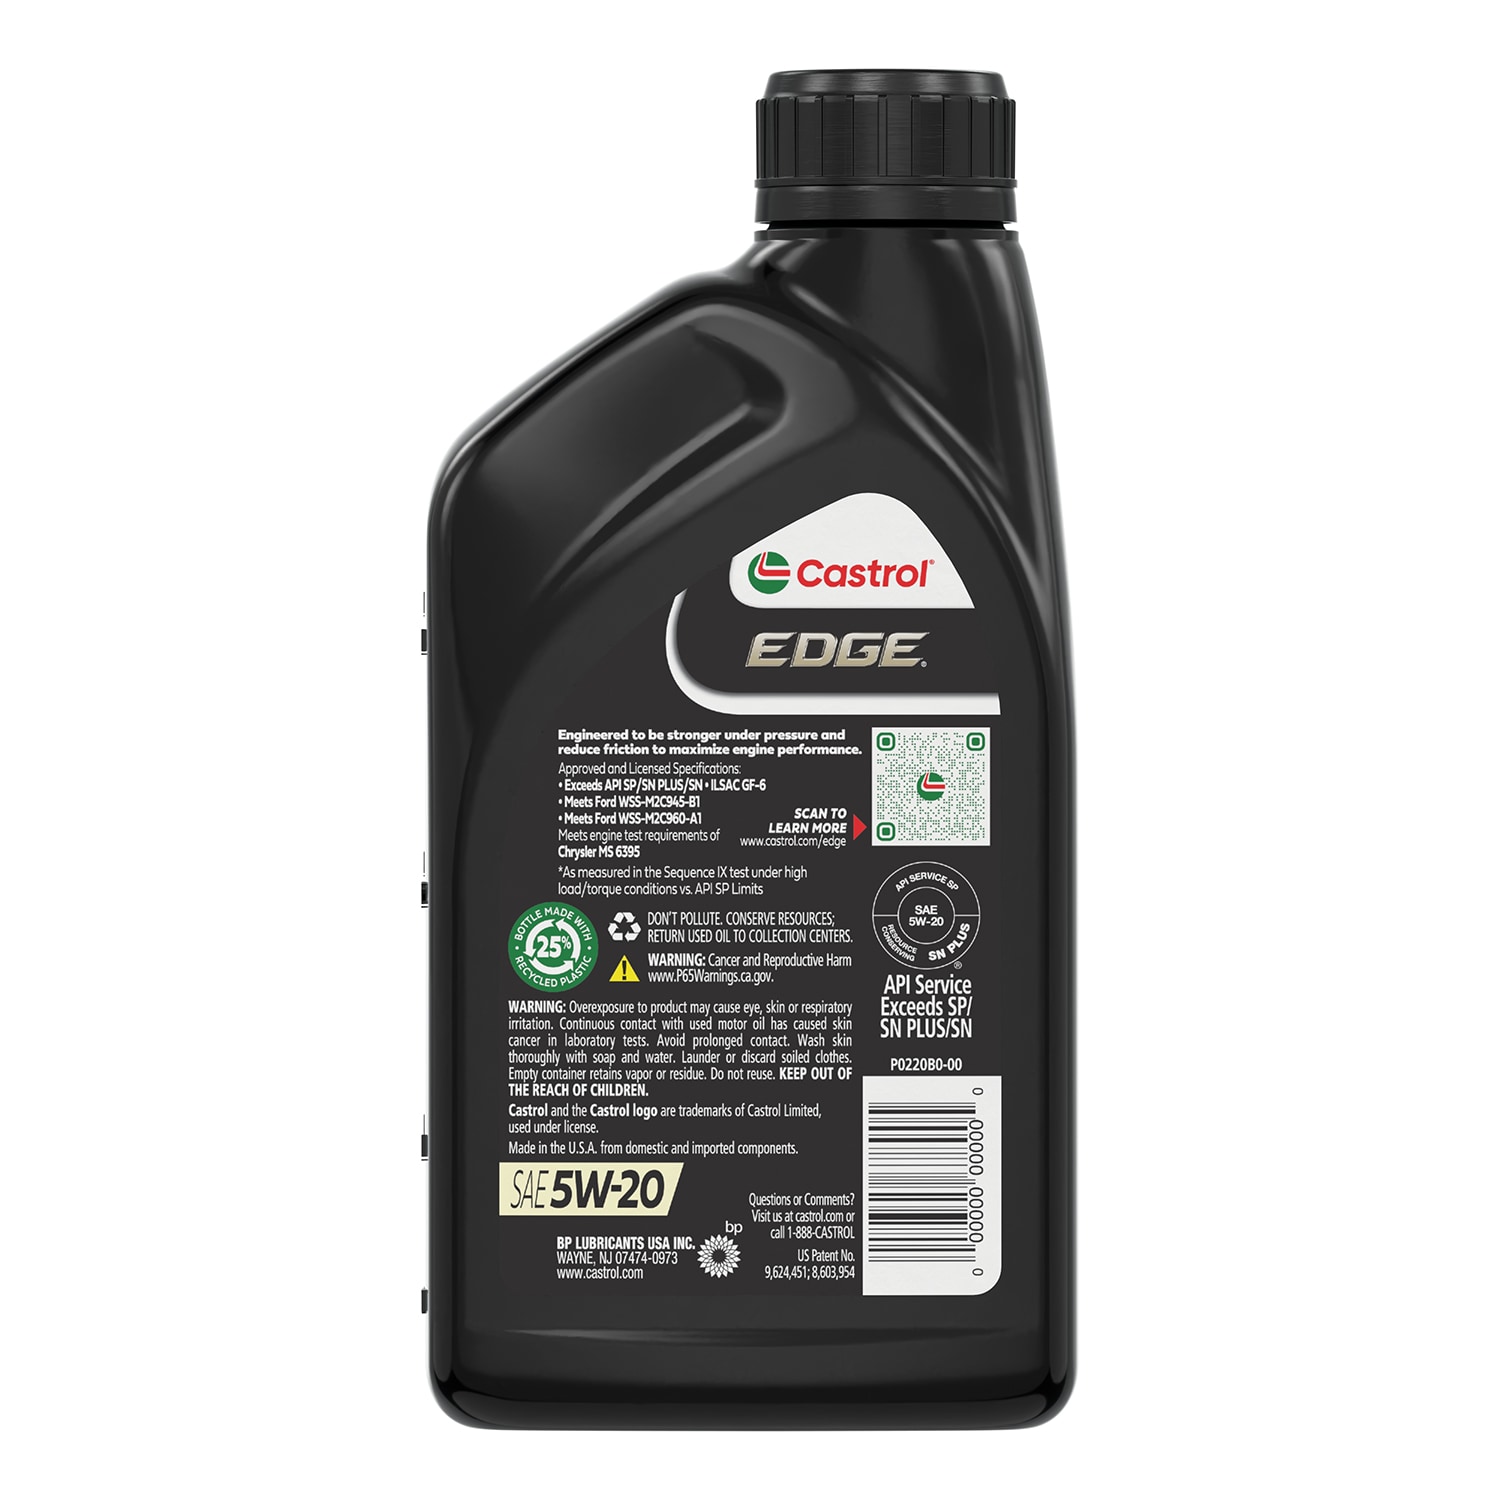 CASTROL 1 Quart 5W-20 Motor Oil for Maximum Engine Protection and  Performance in the Motor Oil u0026 Additives department at Lowes.com